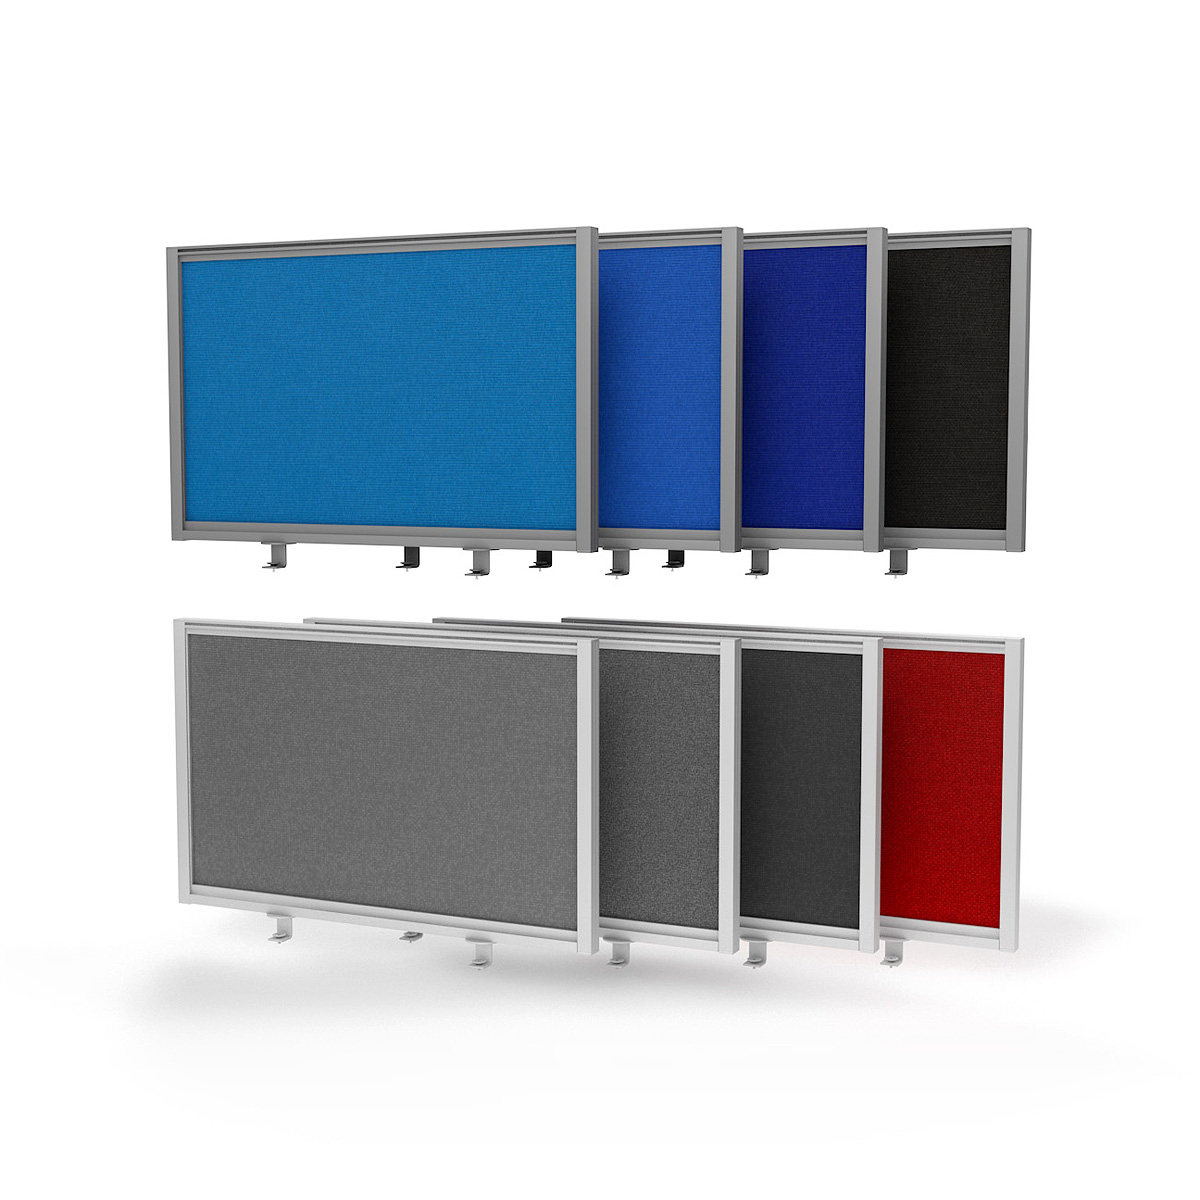 FRONTIER® Office Screen Desk Dividers in a Choice of 8 Fabric Colours